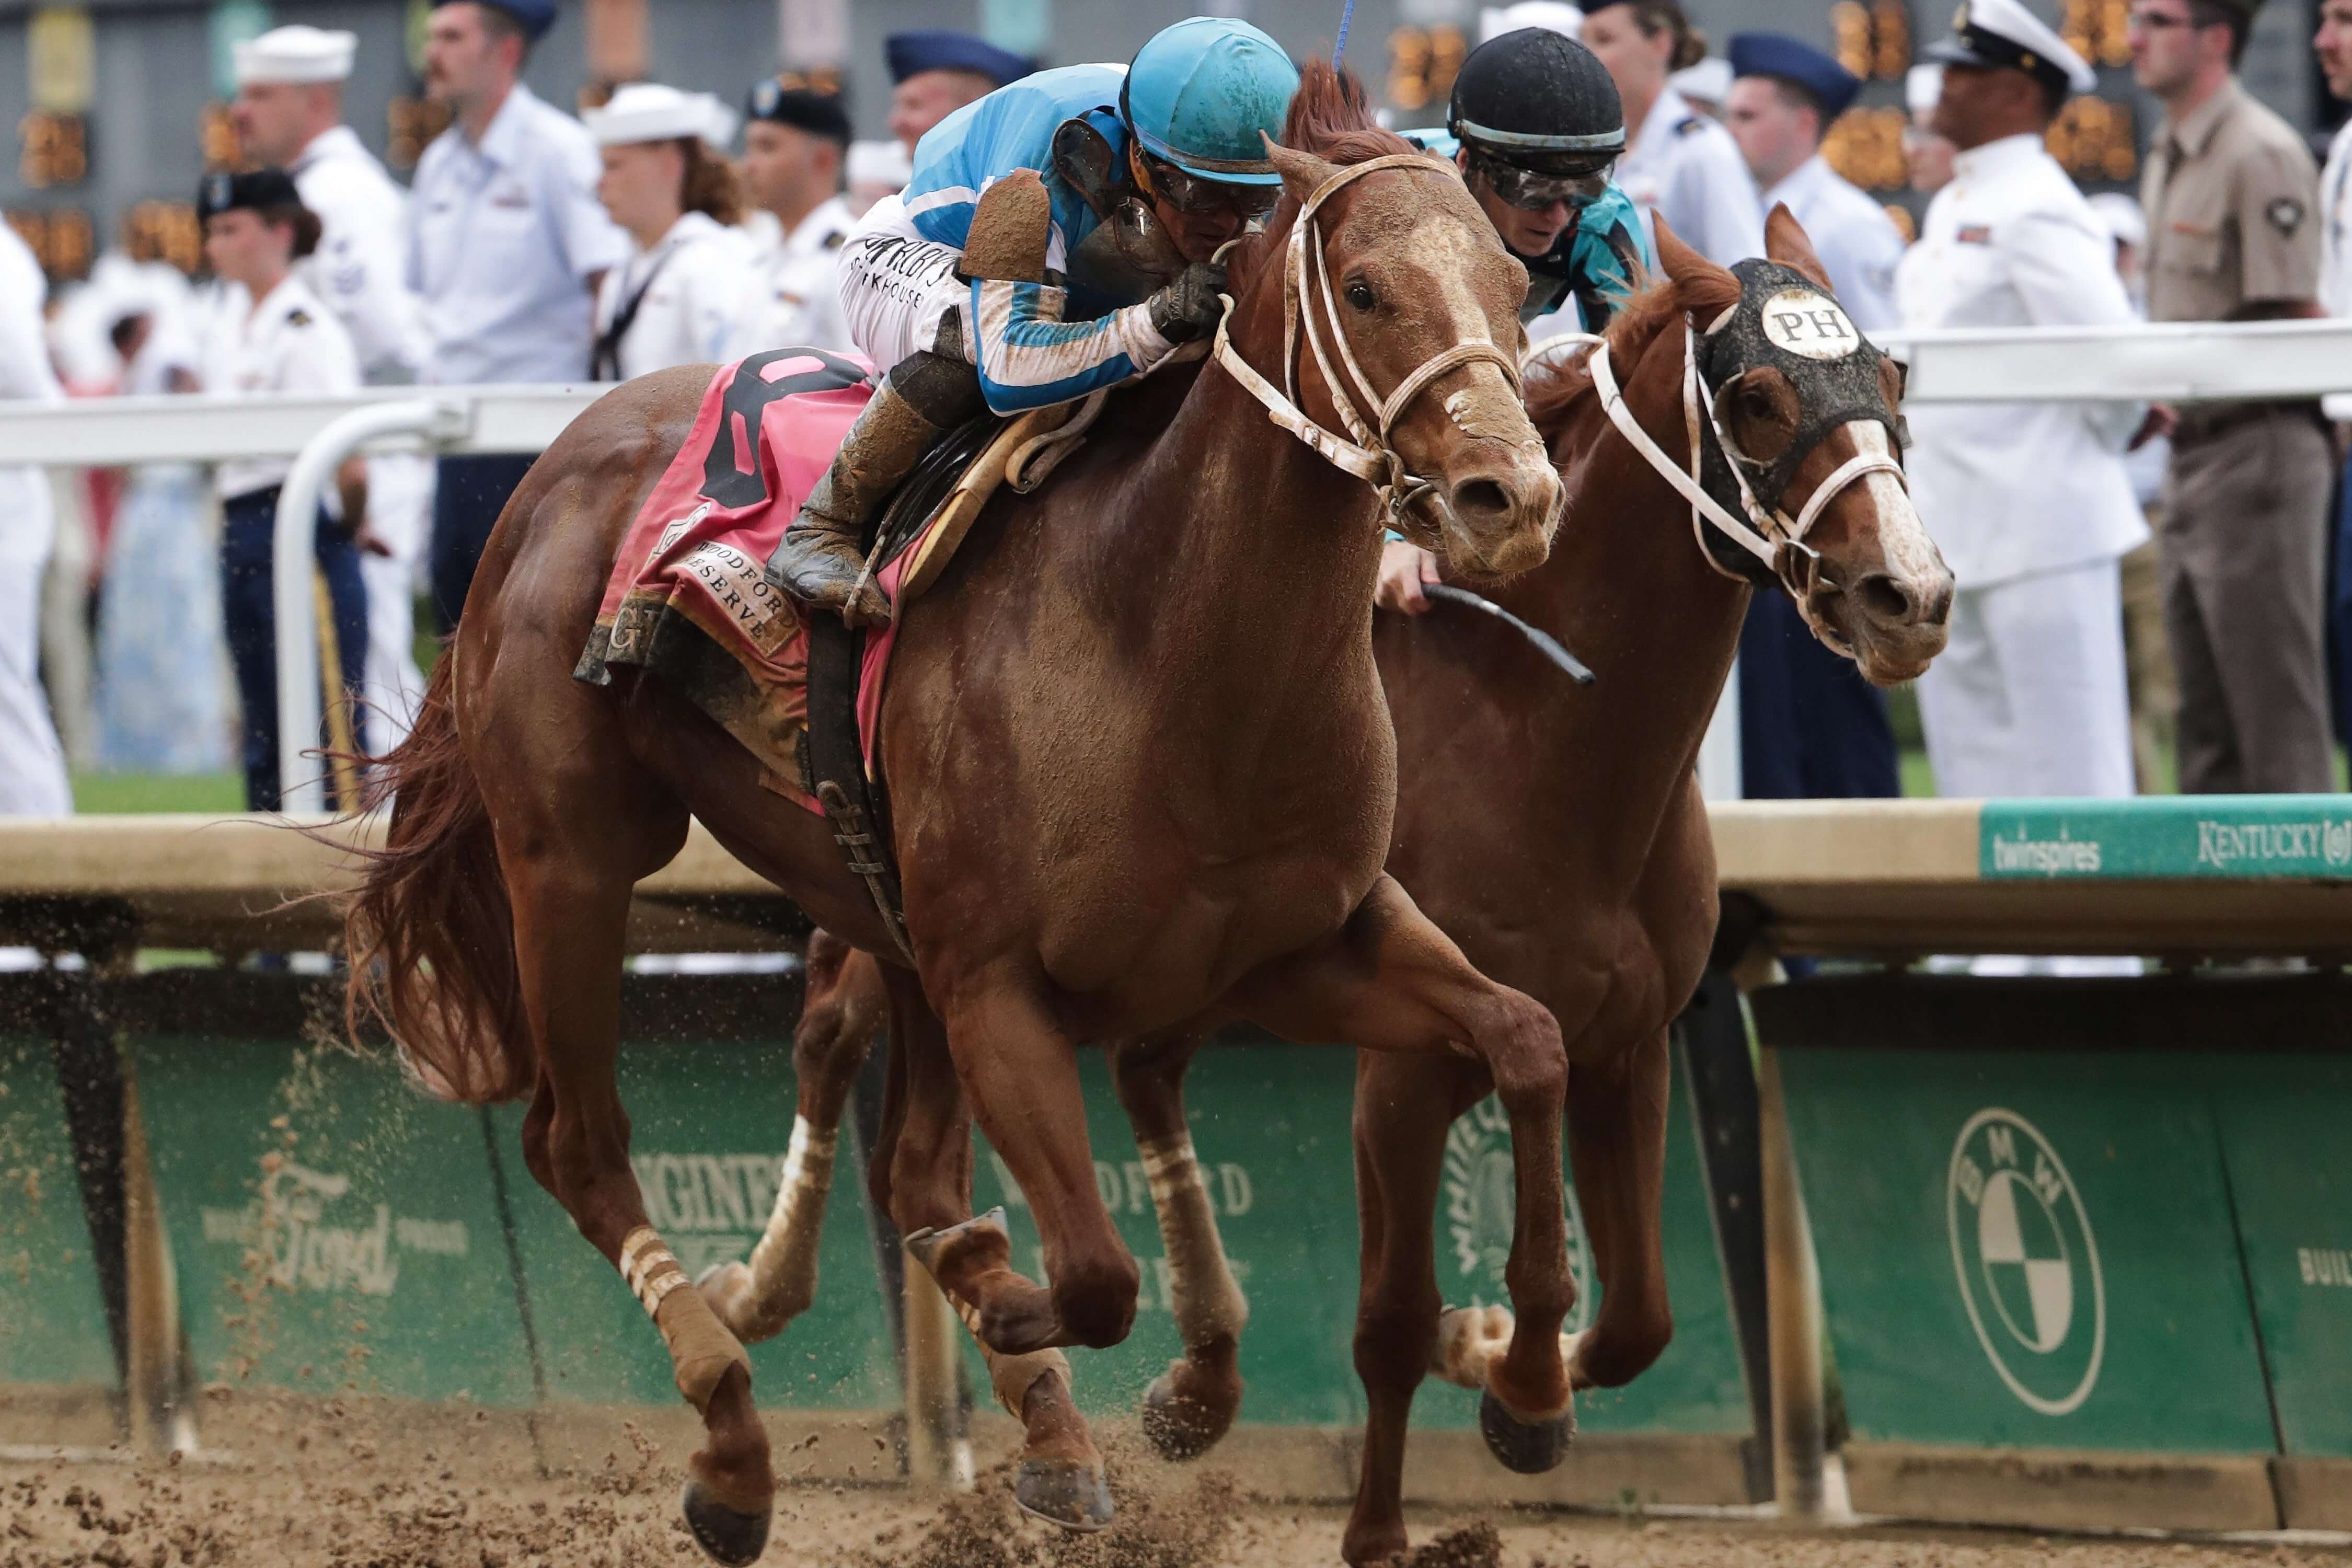 Horse Racing Picks, Odds, and Best Bets for August 26: Can Mage Take Travers Stakes?